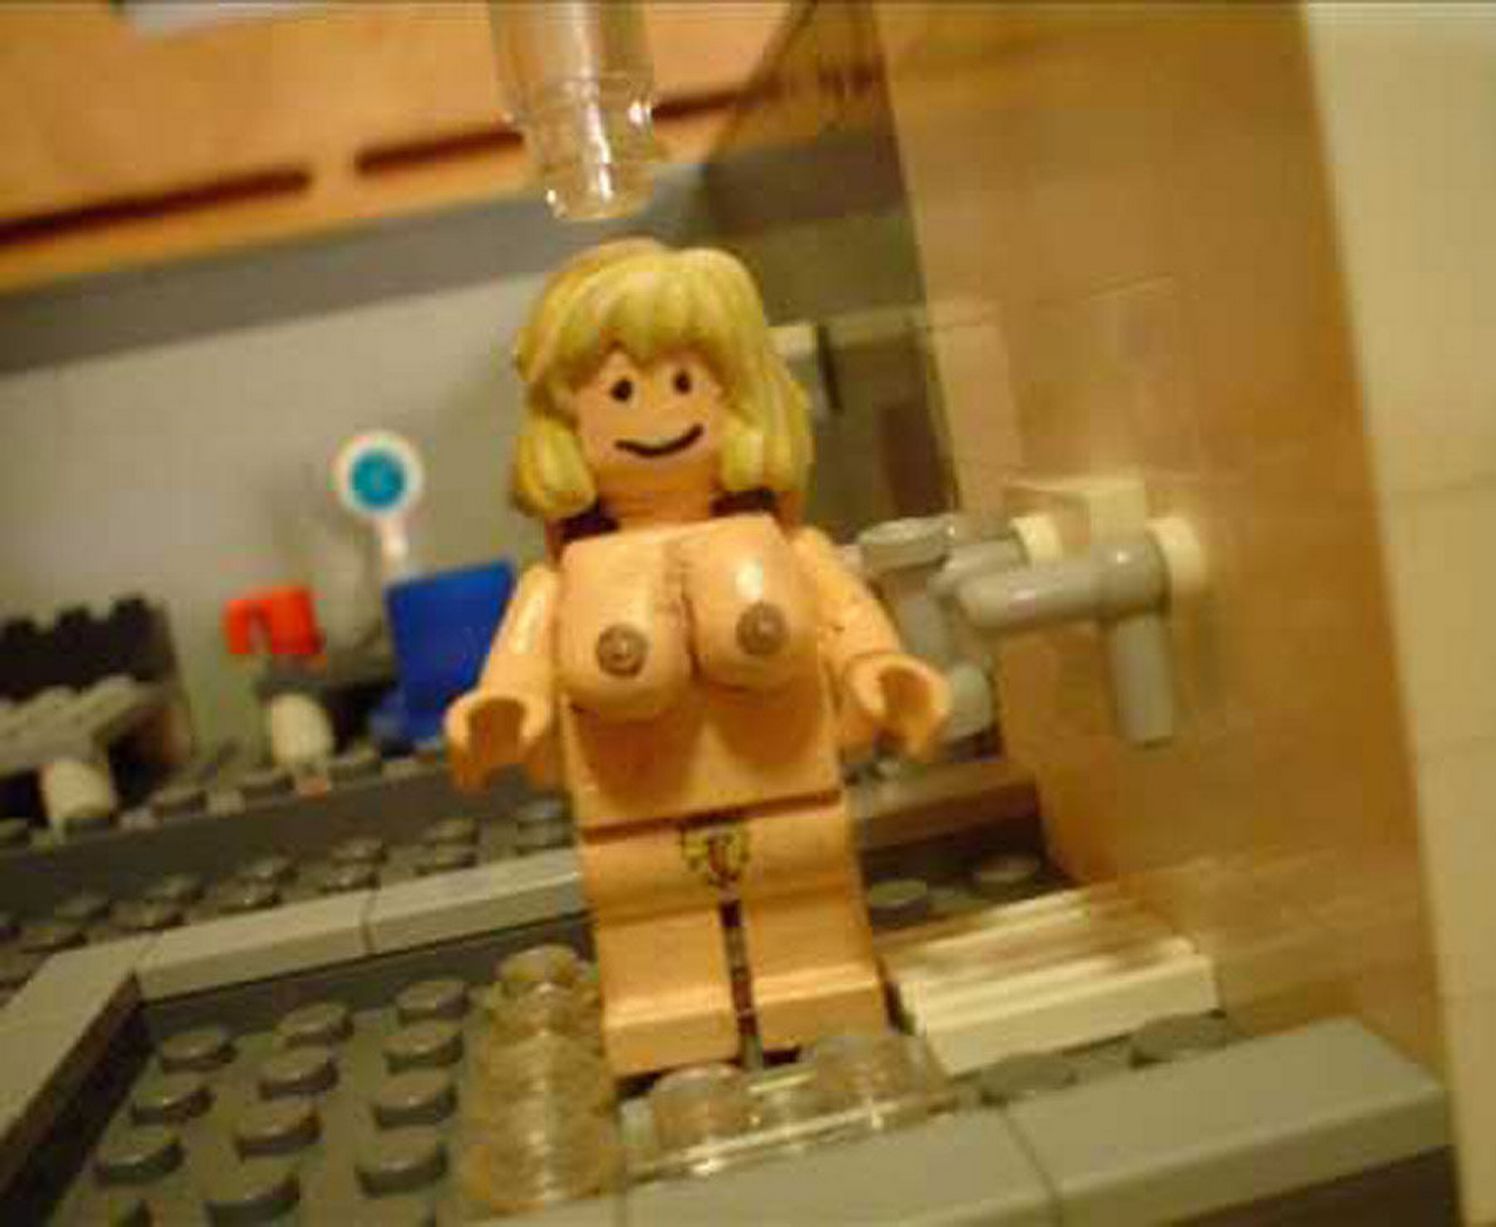 Lego Porn Tits - Lego porn videos - Best adult videos and photos